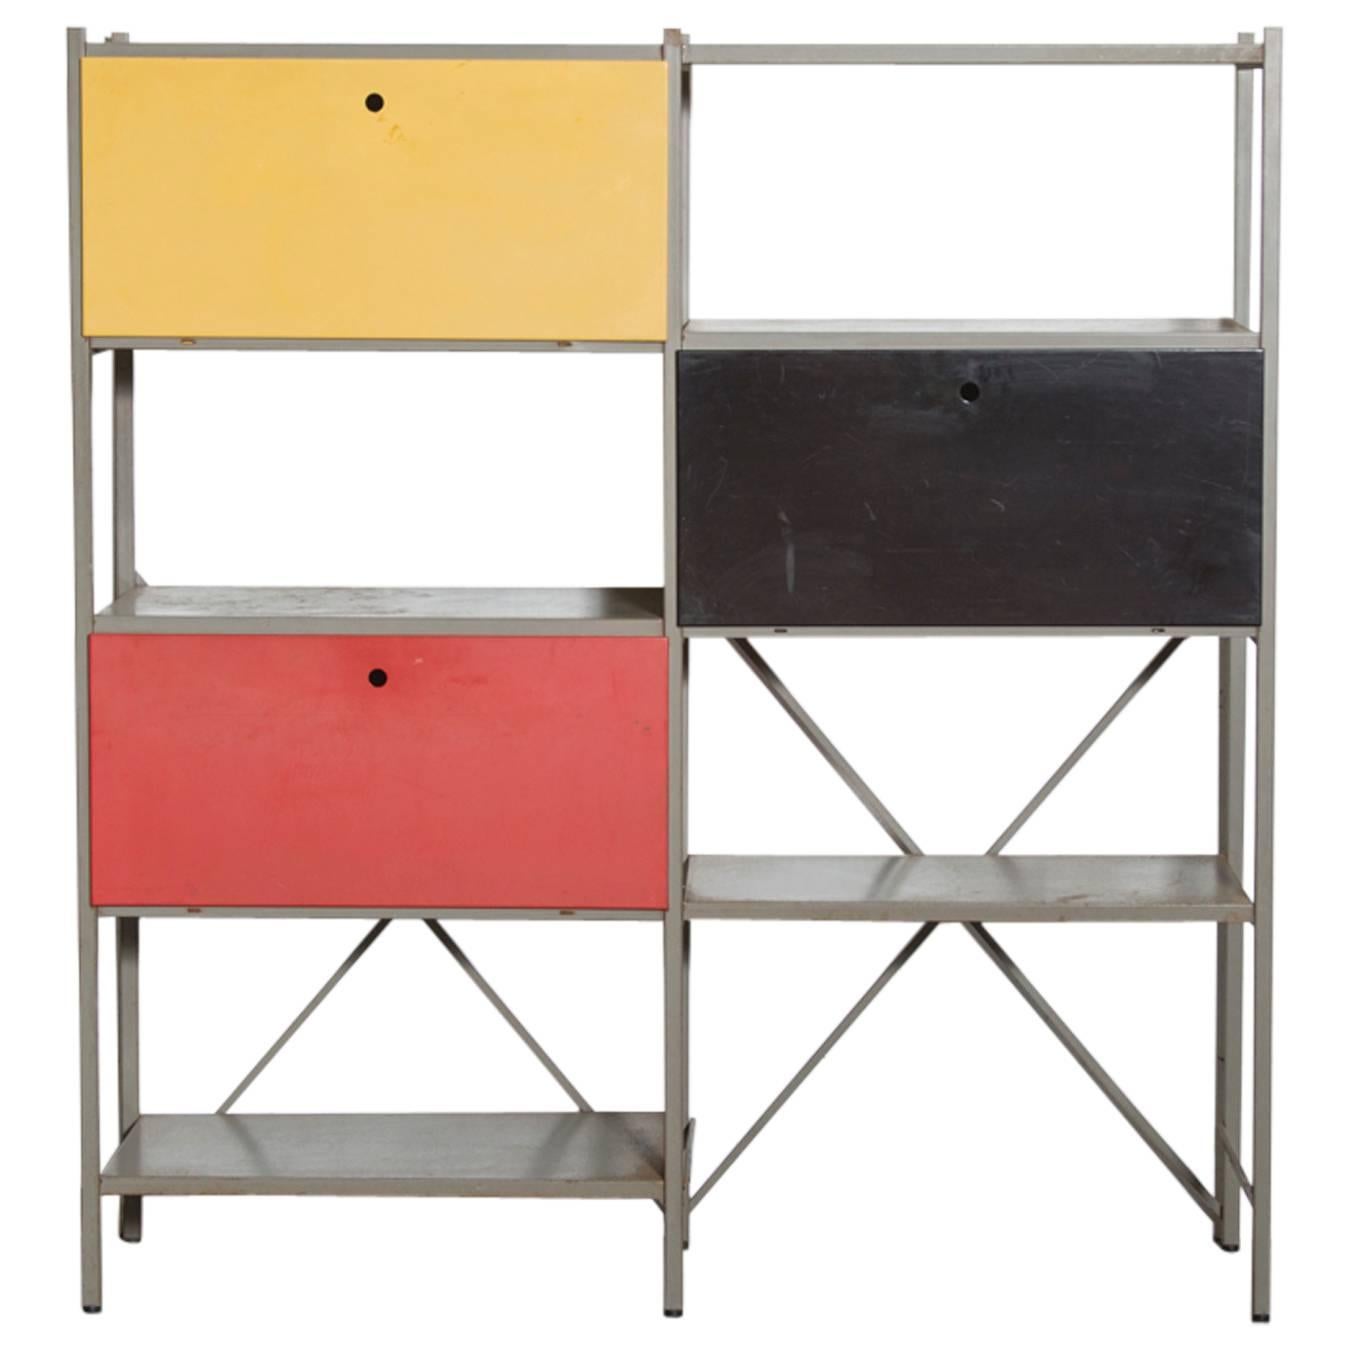 Wim Rietveld Industrial Metal Cabinet #663-2 for Gispen